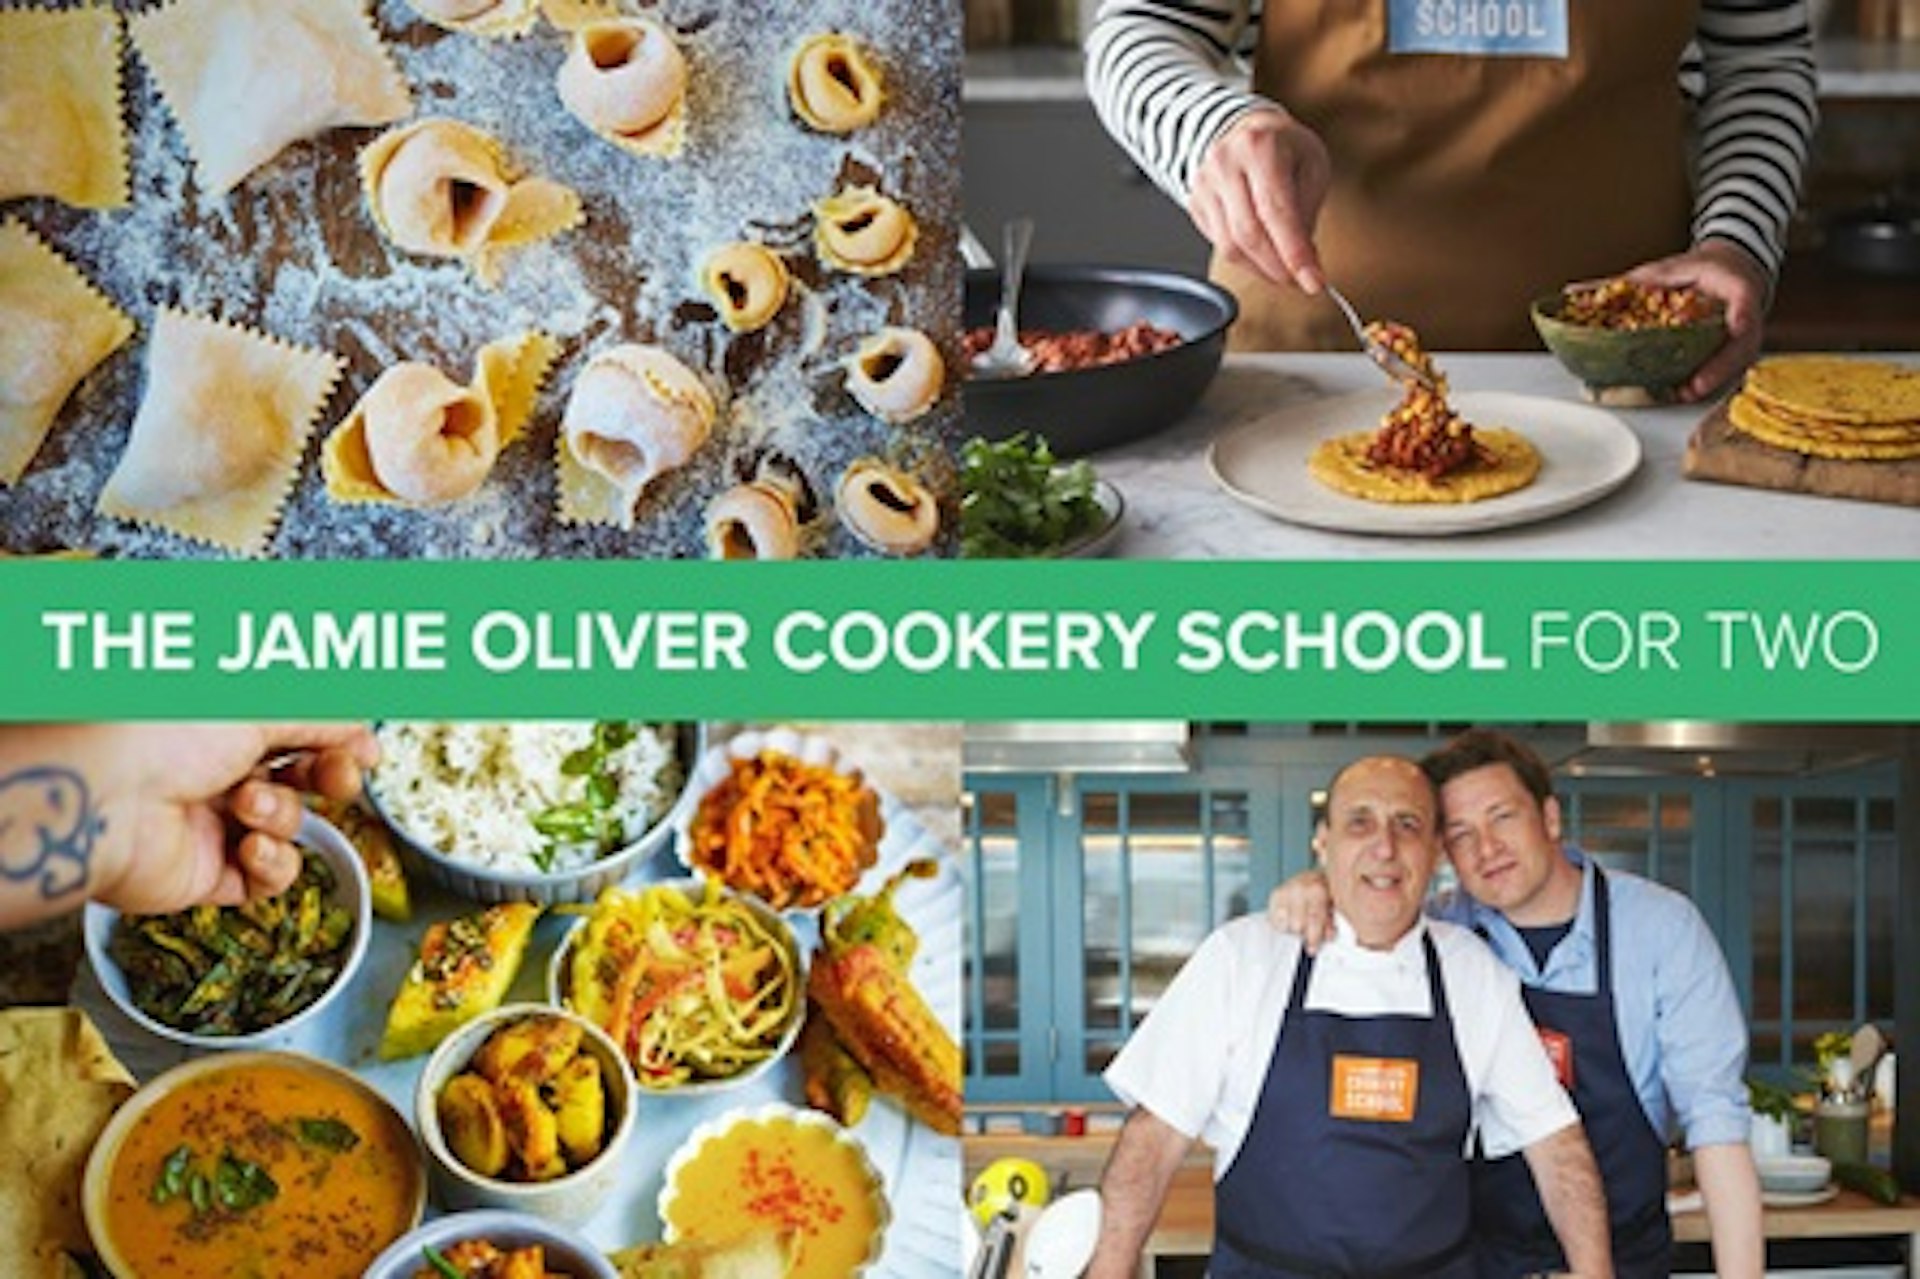 Cookery Class for Two at The Jamie Oliver Cookery School 1